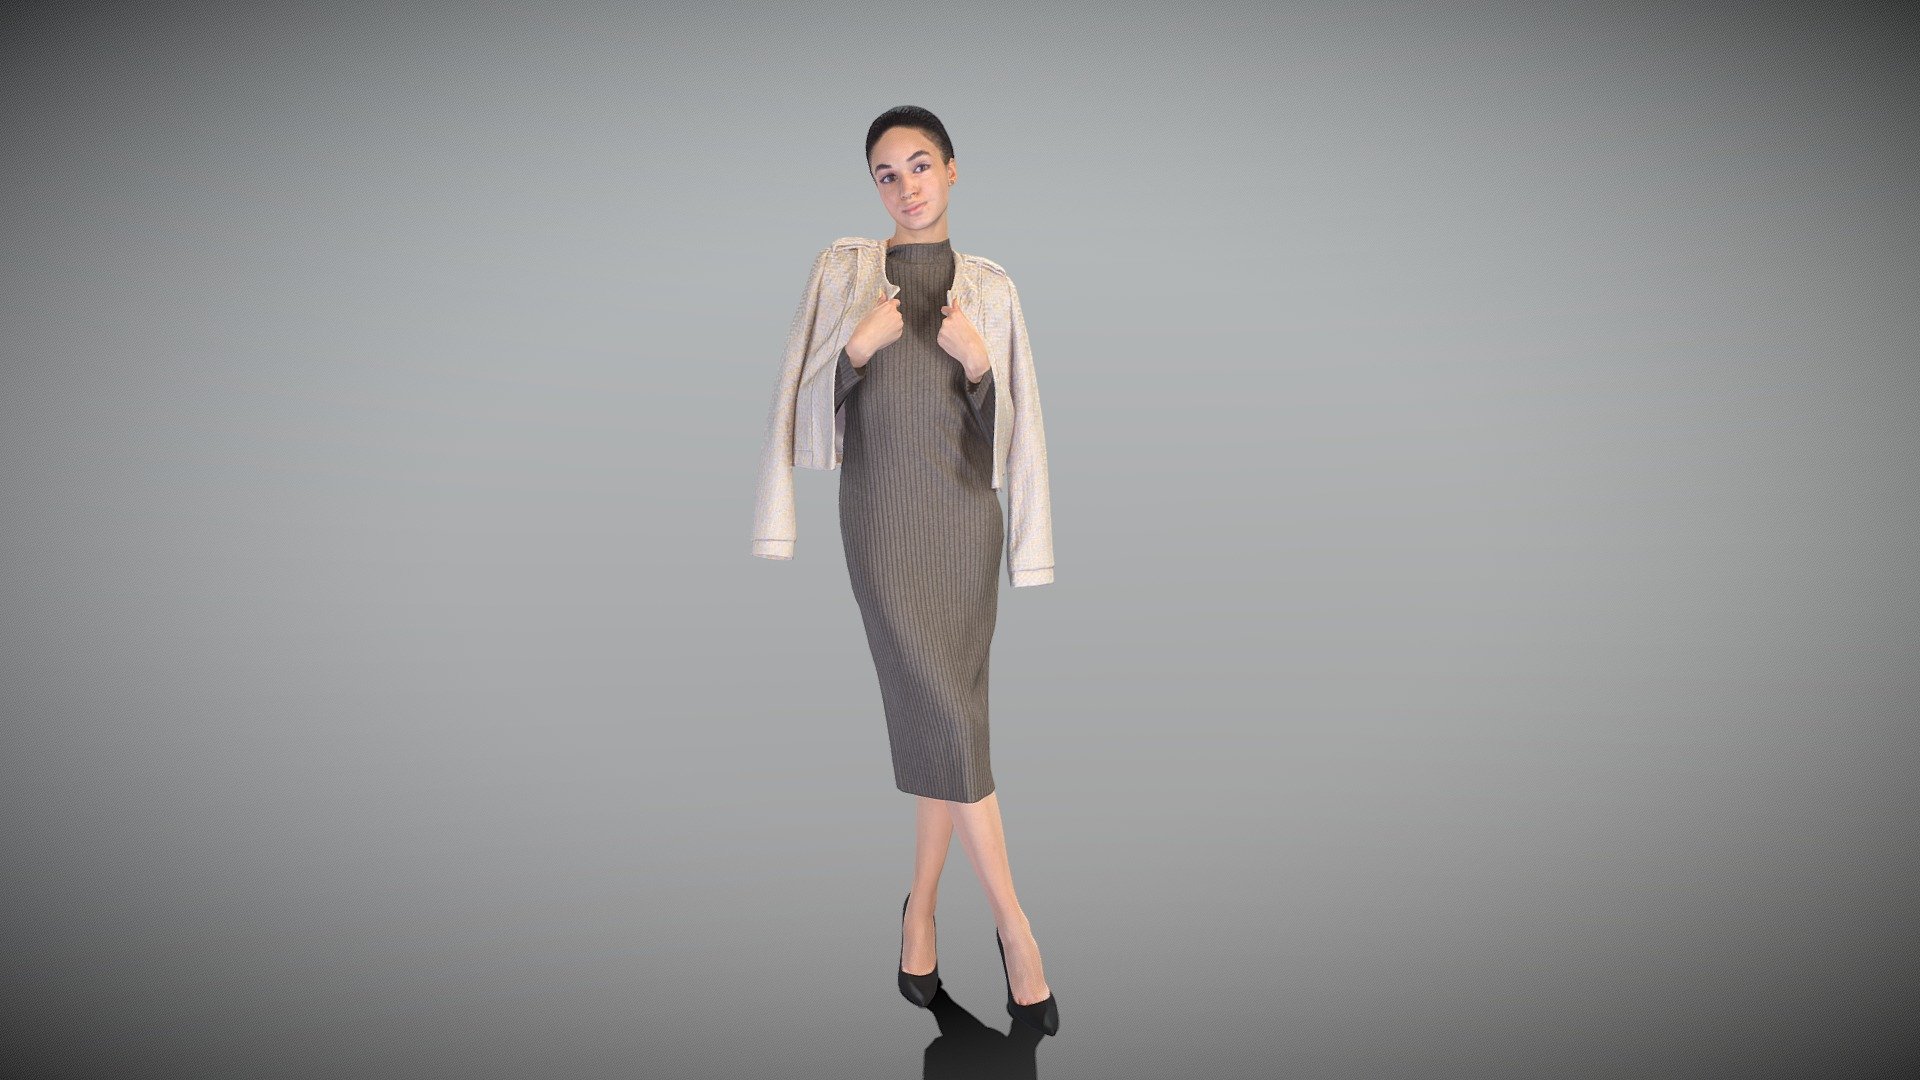 This is a true human size and detailed model of a beautiful young woman of Caucasian appearance dressed in midi black dress. The model is captured in casual pose to be perfectly matching for various architectural, product visualization as a background character within urban installations, city designs, outdoor design presentations, VR/AR content, etc.

Technical specifications:




digital double 3d scan model

150k &amp; 30k triangles | double triangulated

high-poly model (.ztl tool with 5 subdivisions) clean and retopologized automatically via ZRemesher

sufficiently clean

PBR textures 8K resolution: Diffuse, Normal, Specular maps

non-overlapping UV map

no extra plugins are required for this model

Download package includes a Cinema 4D project file with Redshift shader, OBJ, FBX, STL files, which are applicable for 3ds Max, Maya, Unreal Engine, Unity, Blender, etc. All the textures you will find in the “Tex” folder, included into the main archive.

3D EVERYTHING

Stand with Ukraine! - Elegant woman in dress and heels 455 - Buy Royalty Free 3D model by deep3dstudio 3d model